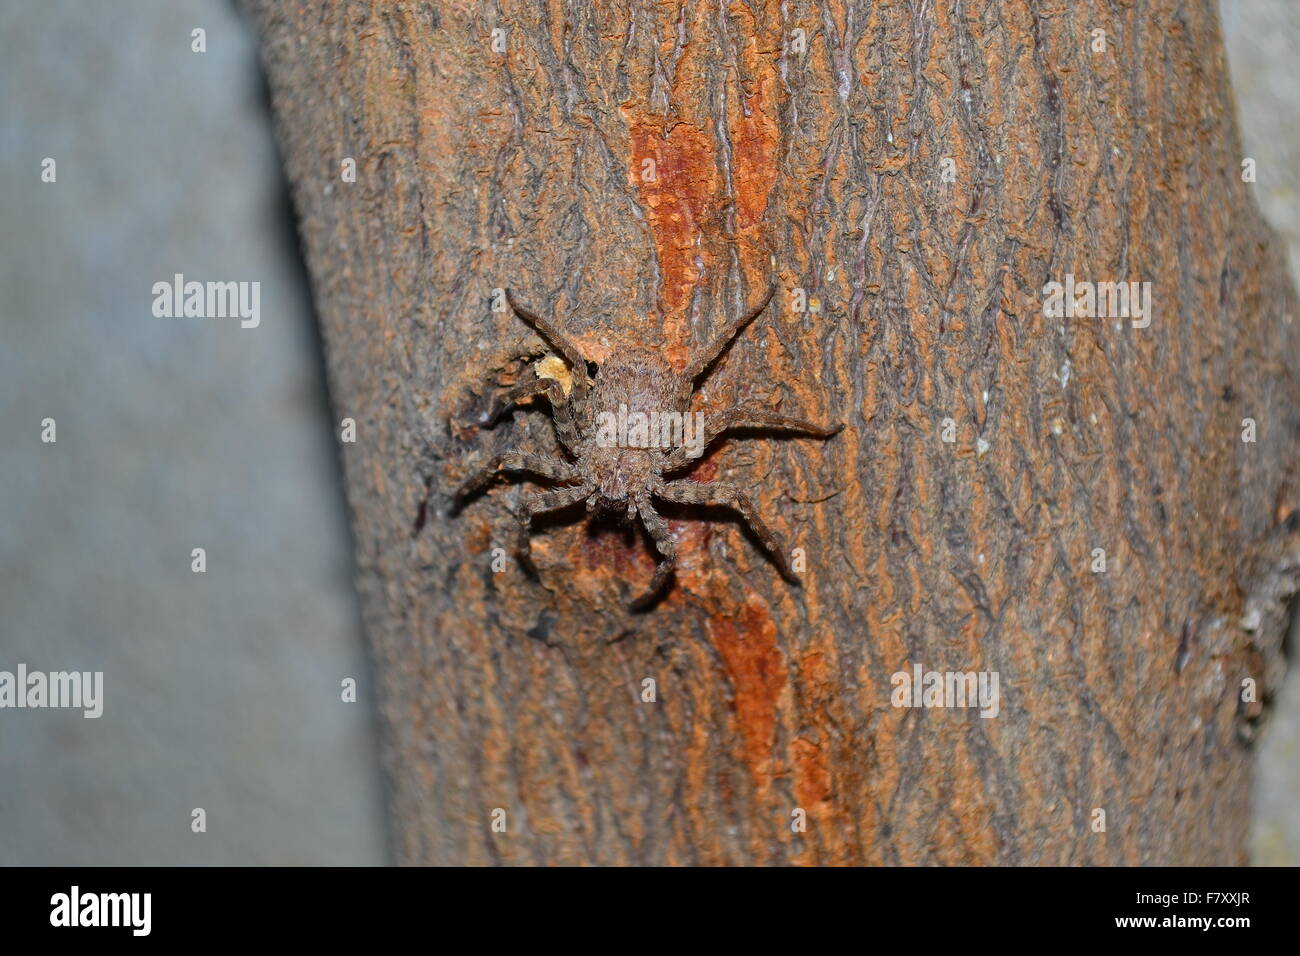 Spider on  a log of wood Stock Photo